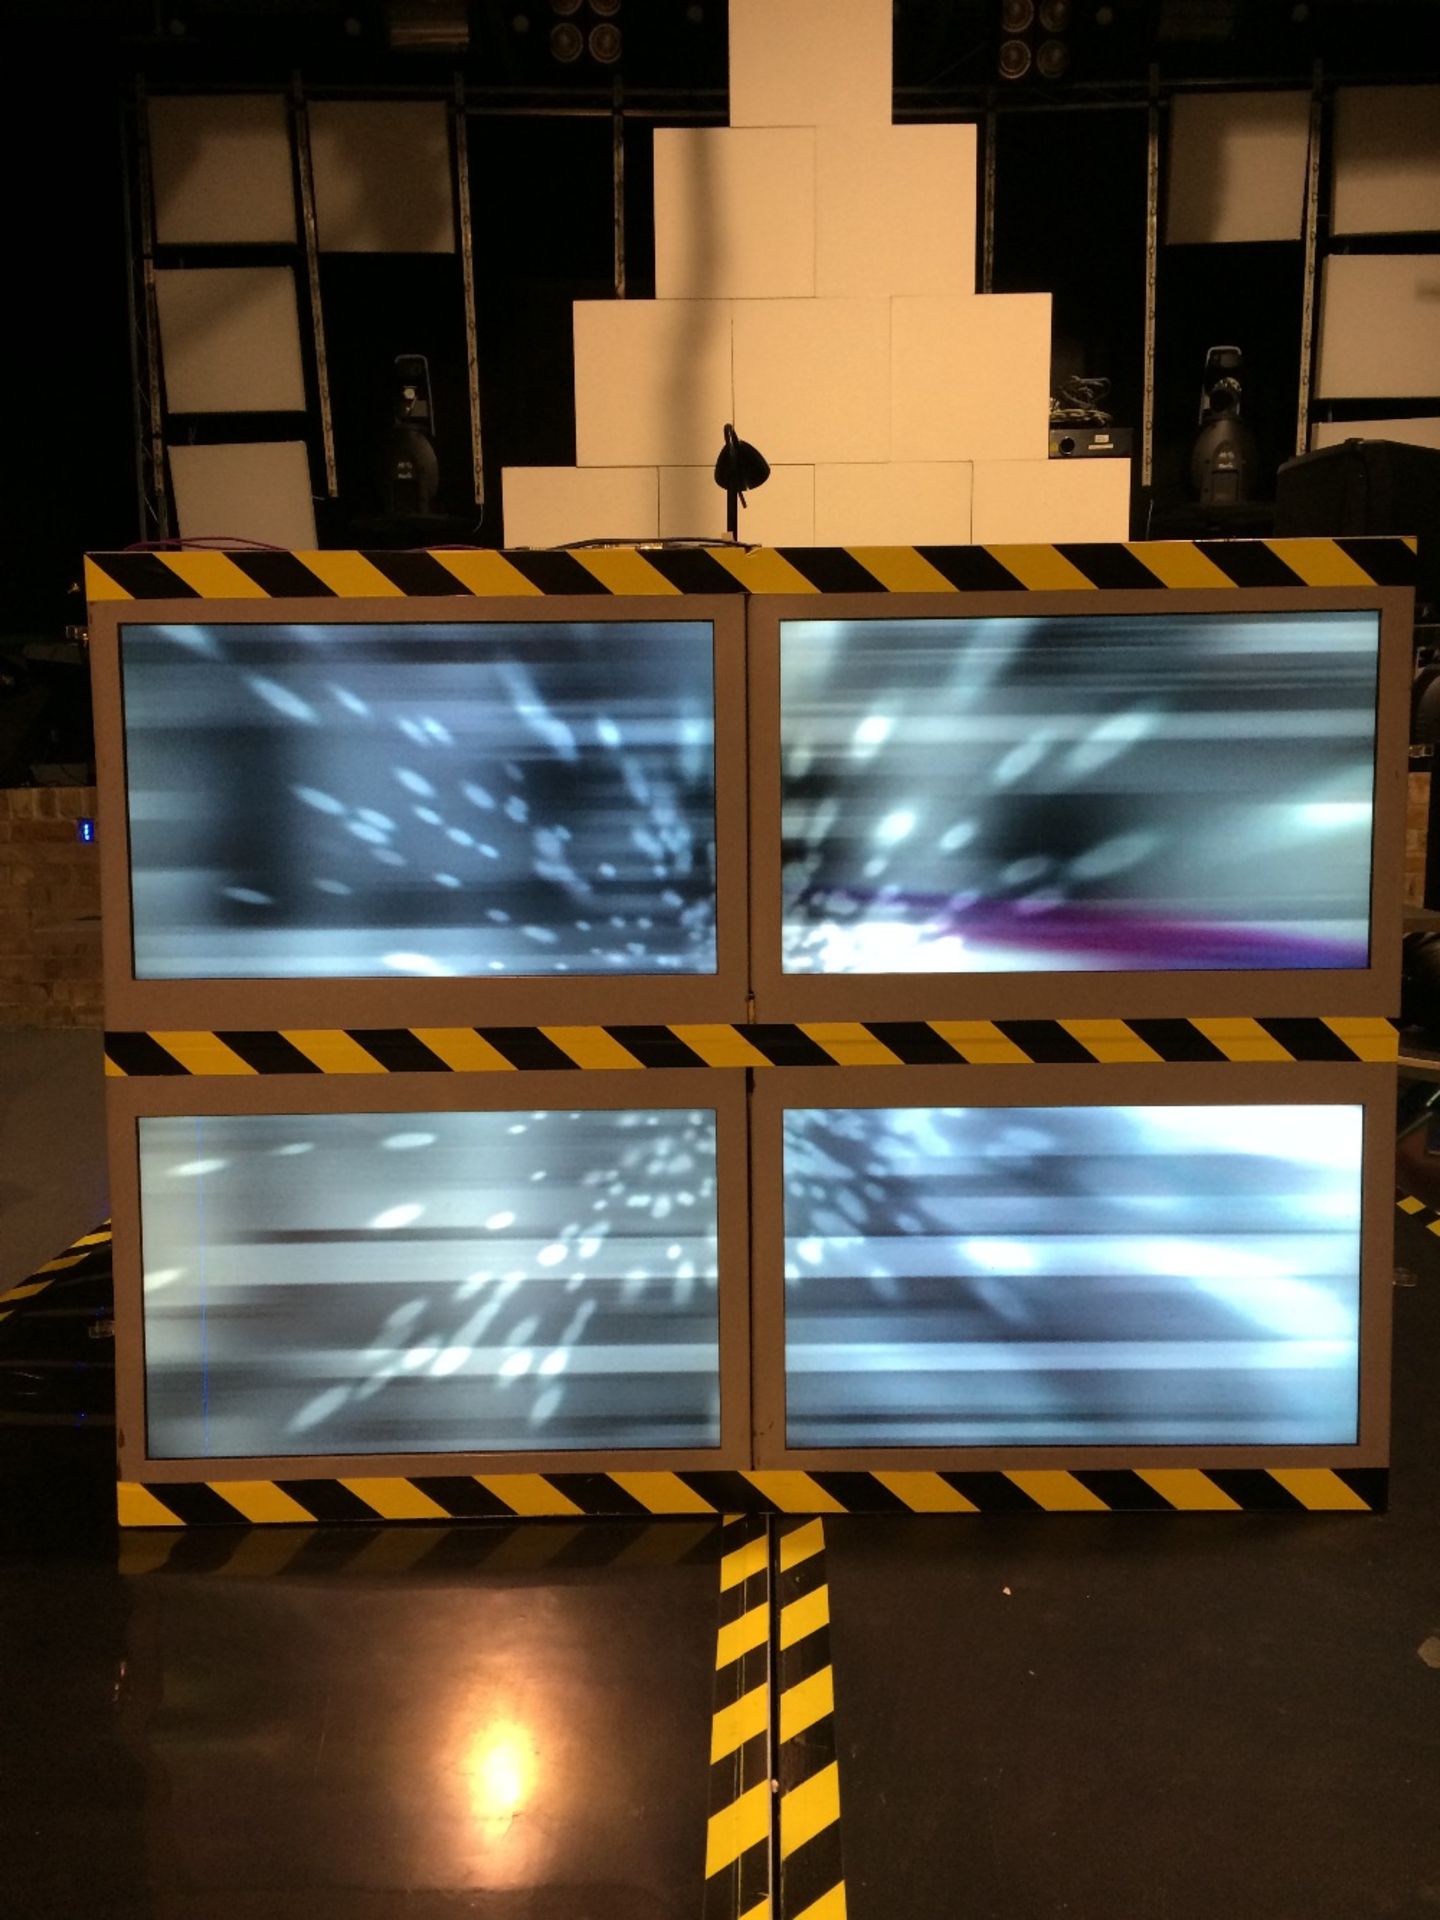 Custom Design Dj Consoe With 4 Screen Lcd Video Wall Metal Front Enclosure And Stand Glass Shelf For - Image 2 of 11